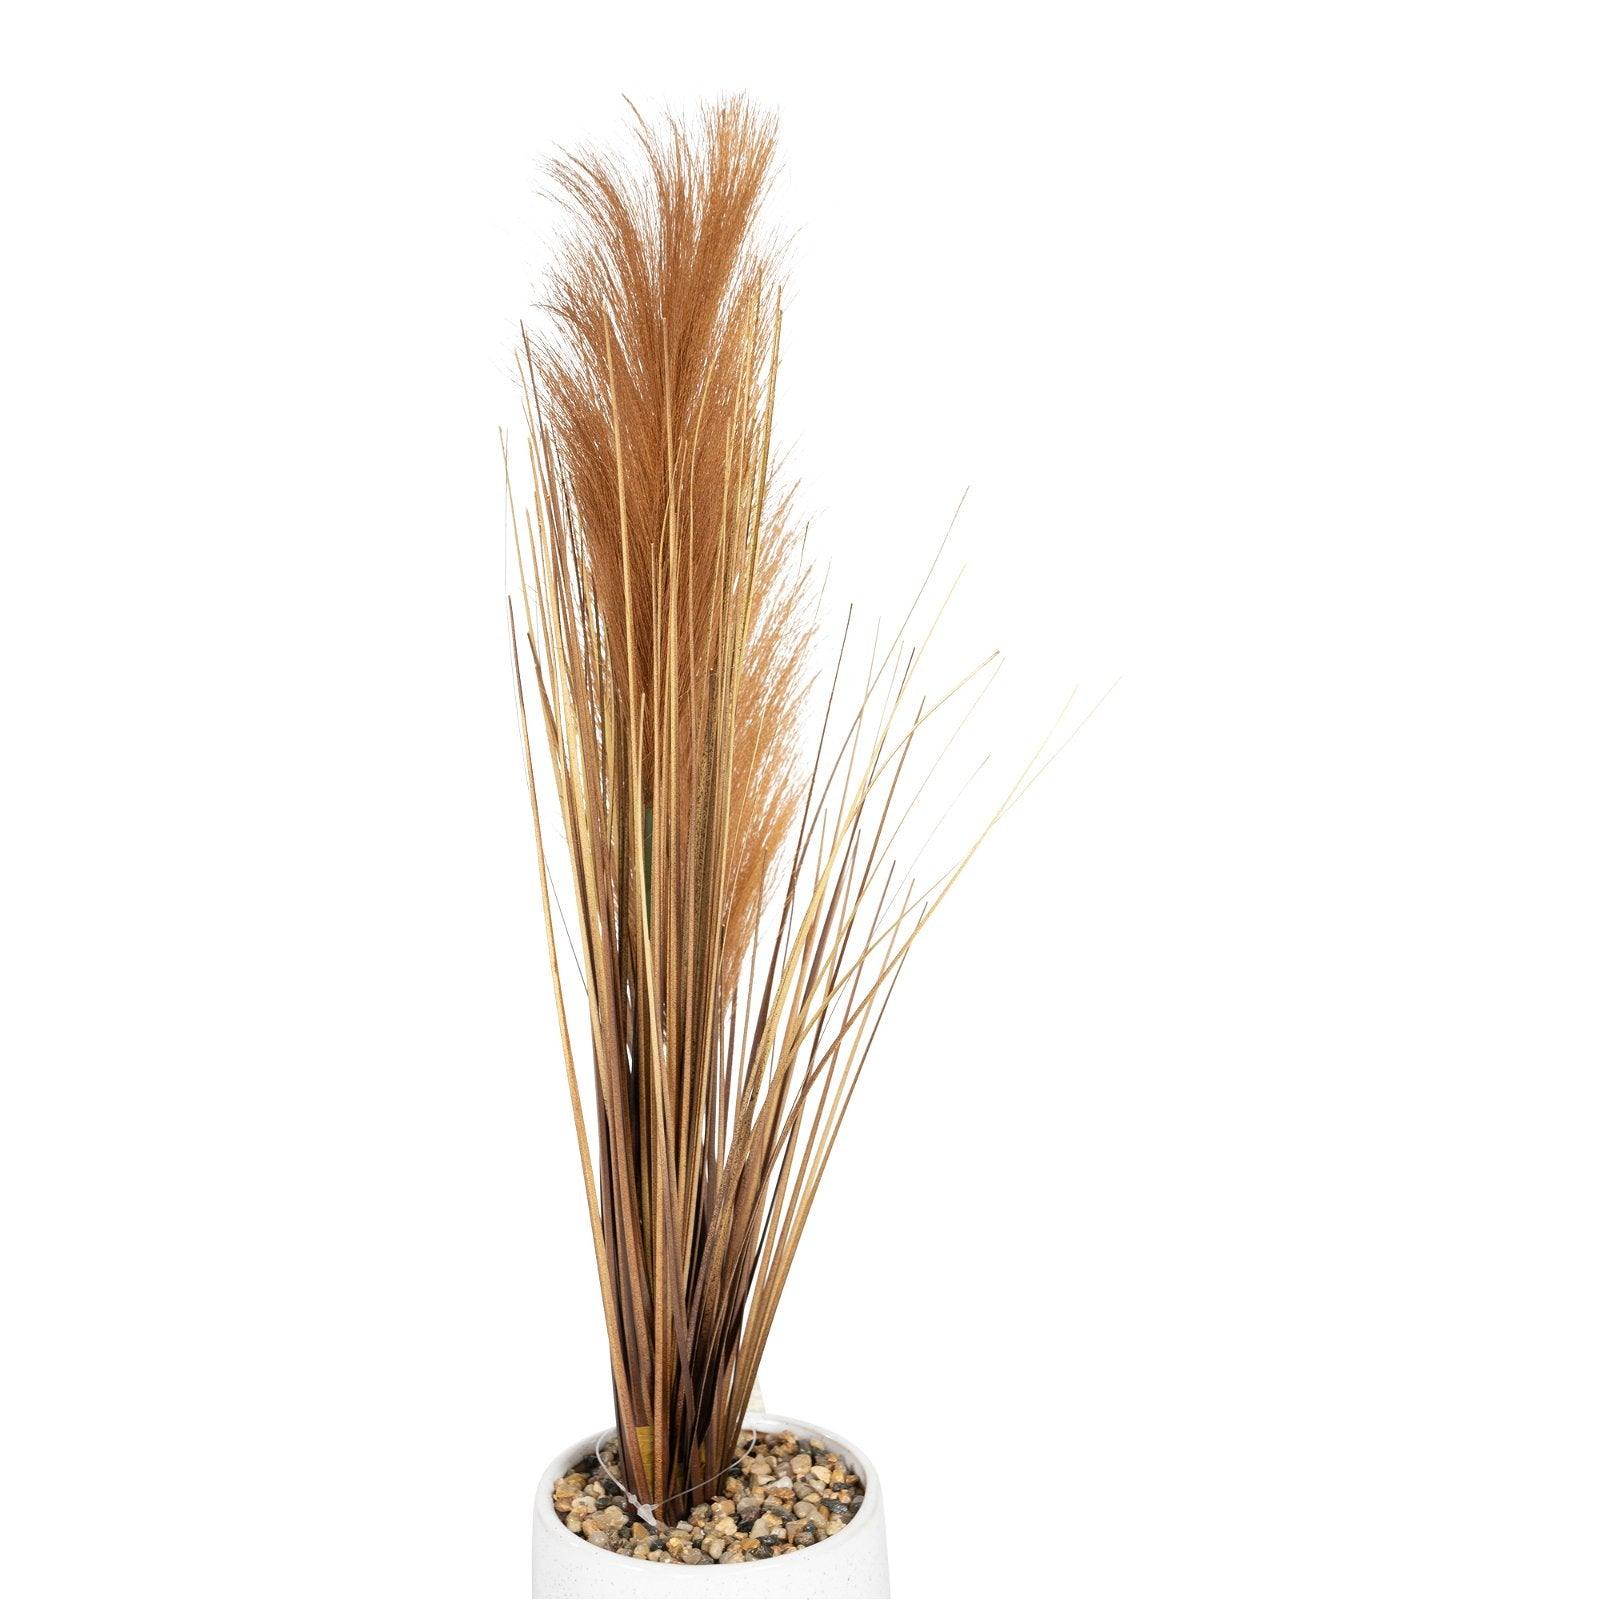 Artificial Grasses In A White Pot With Brown Feathers - 50cm - £20.99 - Artificial Plants 